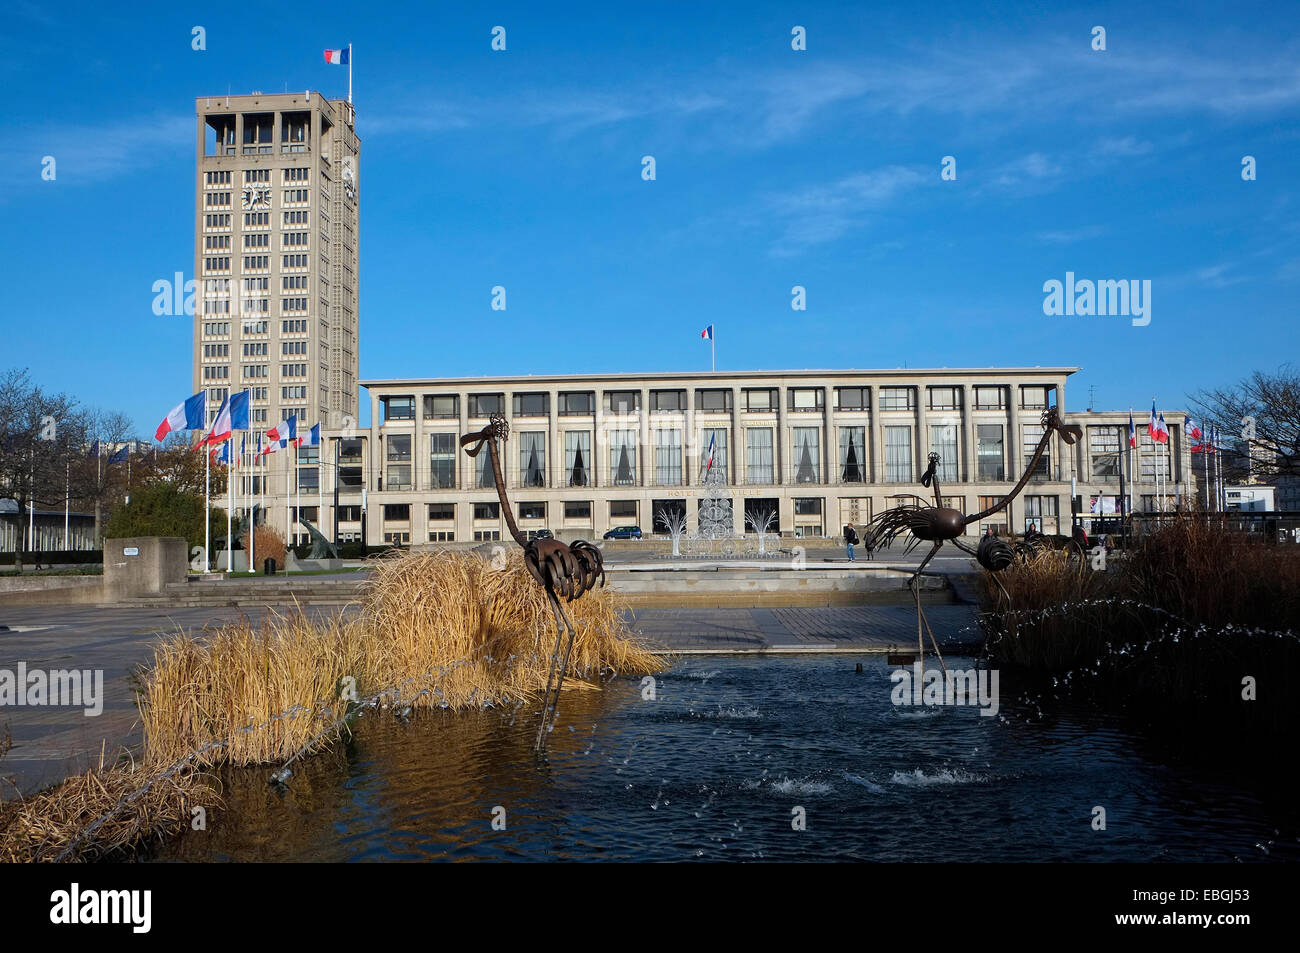 mayor's office building, le havre, normandy, france Stock Photo